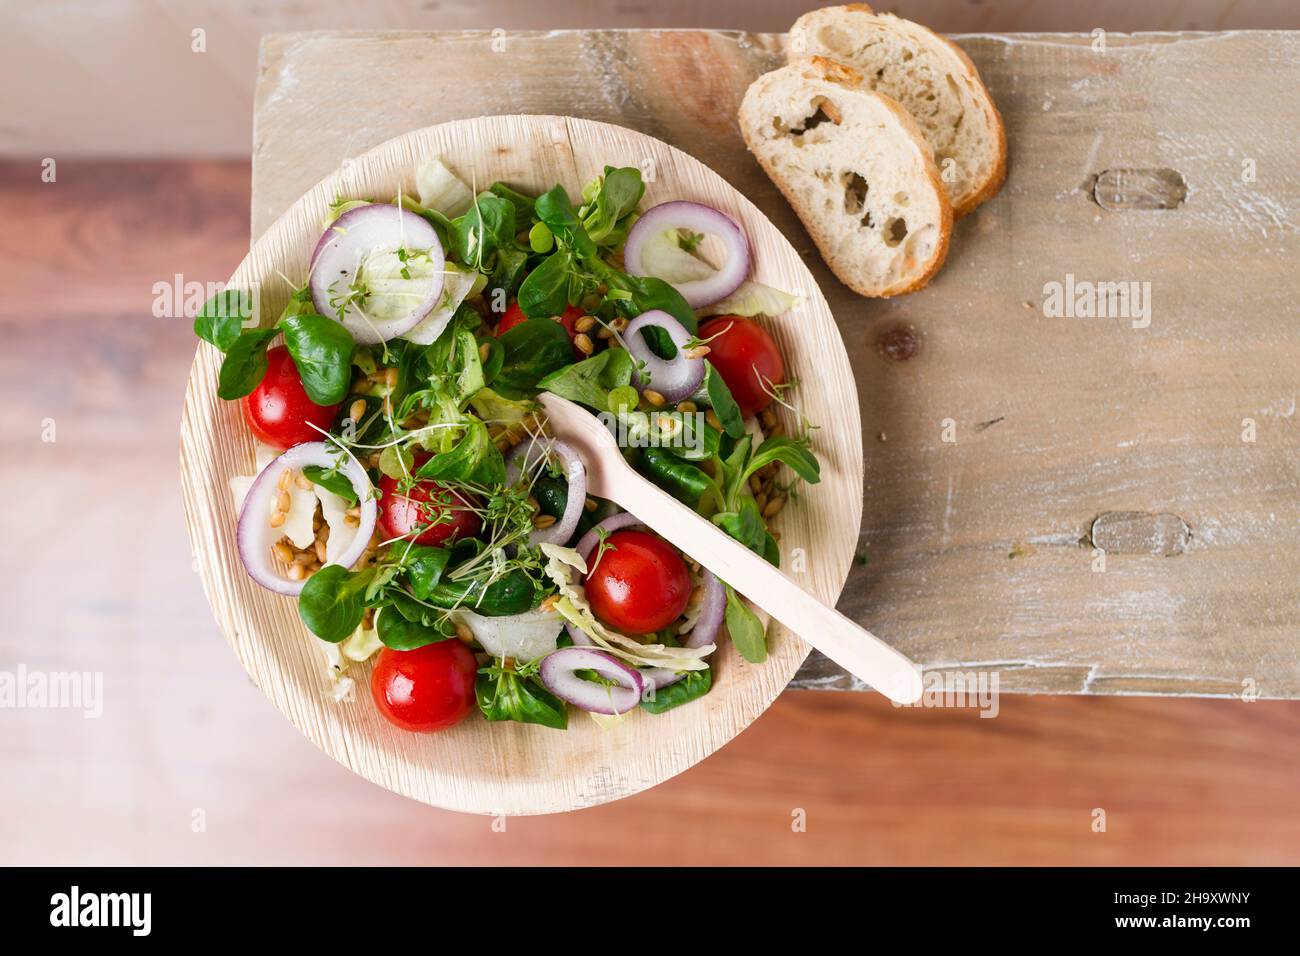 Vegan salad (einkorn wheat, tomatoes, lamb's lettuce, red onion rings, iceberg lettuce, cress, pepper) in a palm leaf bowl Stock Photo